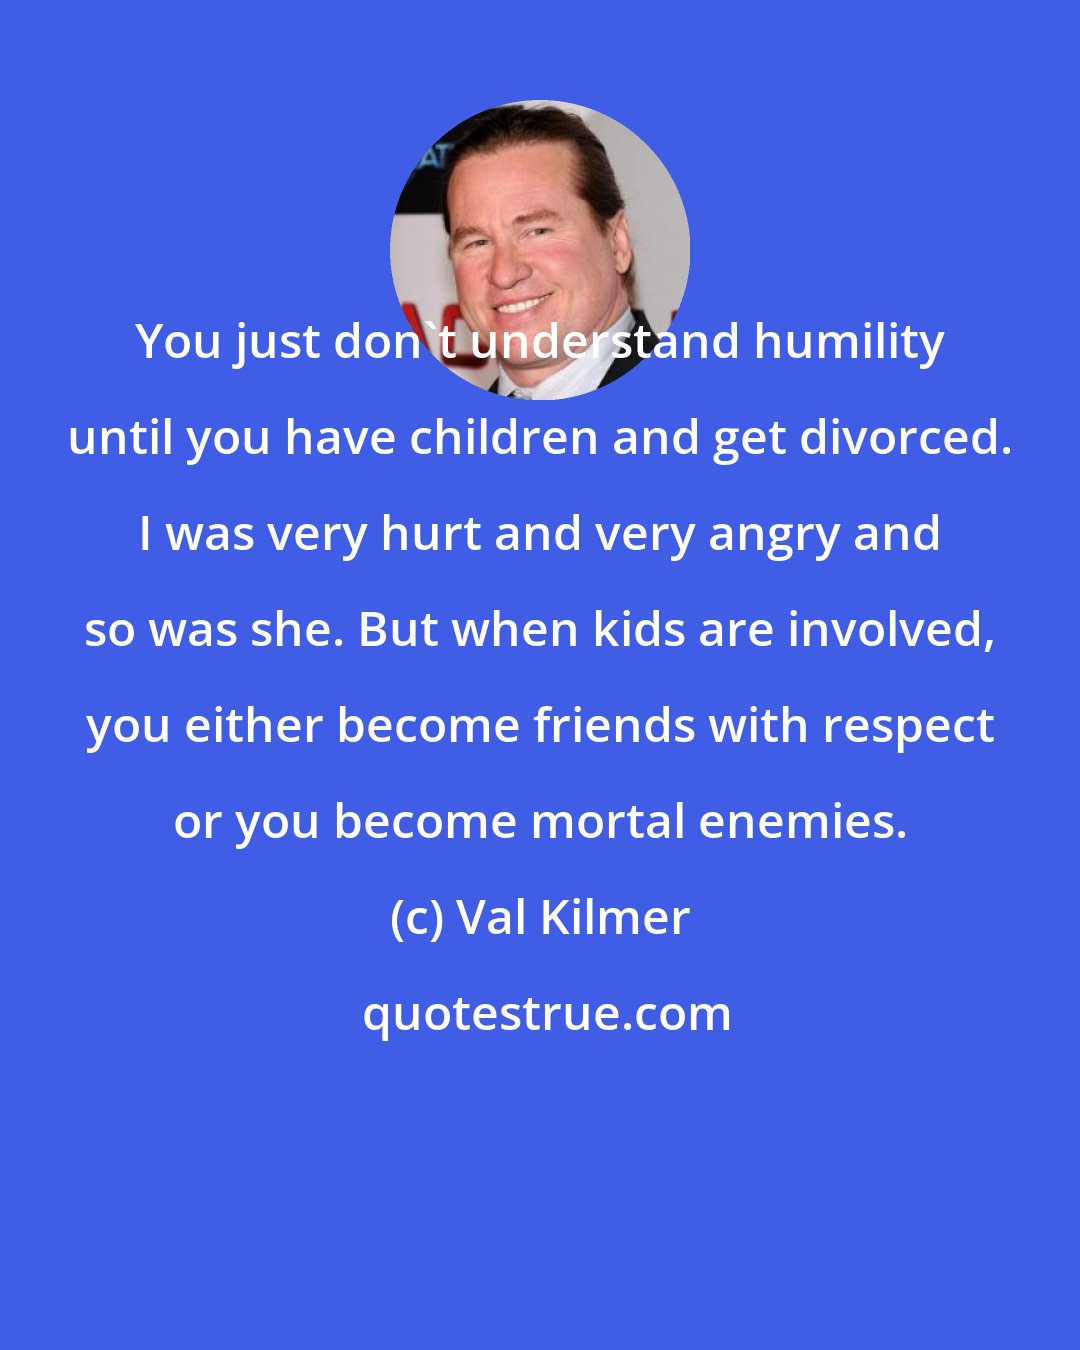 Val Kilmer: You just don't understand humility until you have children and get divorced. I was very hurt and very angry and so was she. But when kids are involved, you either become friends with respect or you become mortal enemies.